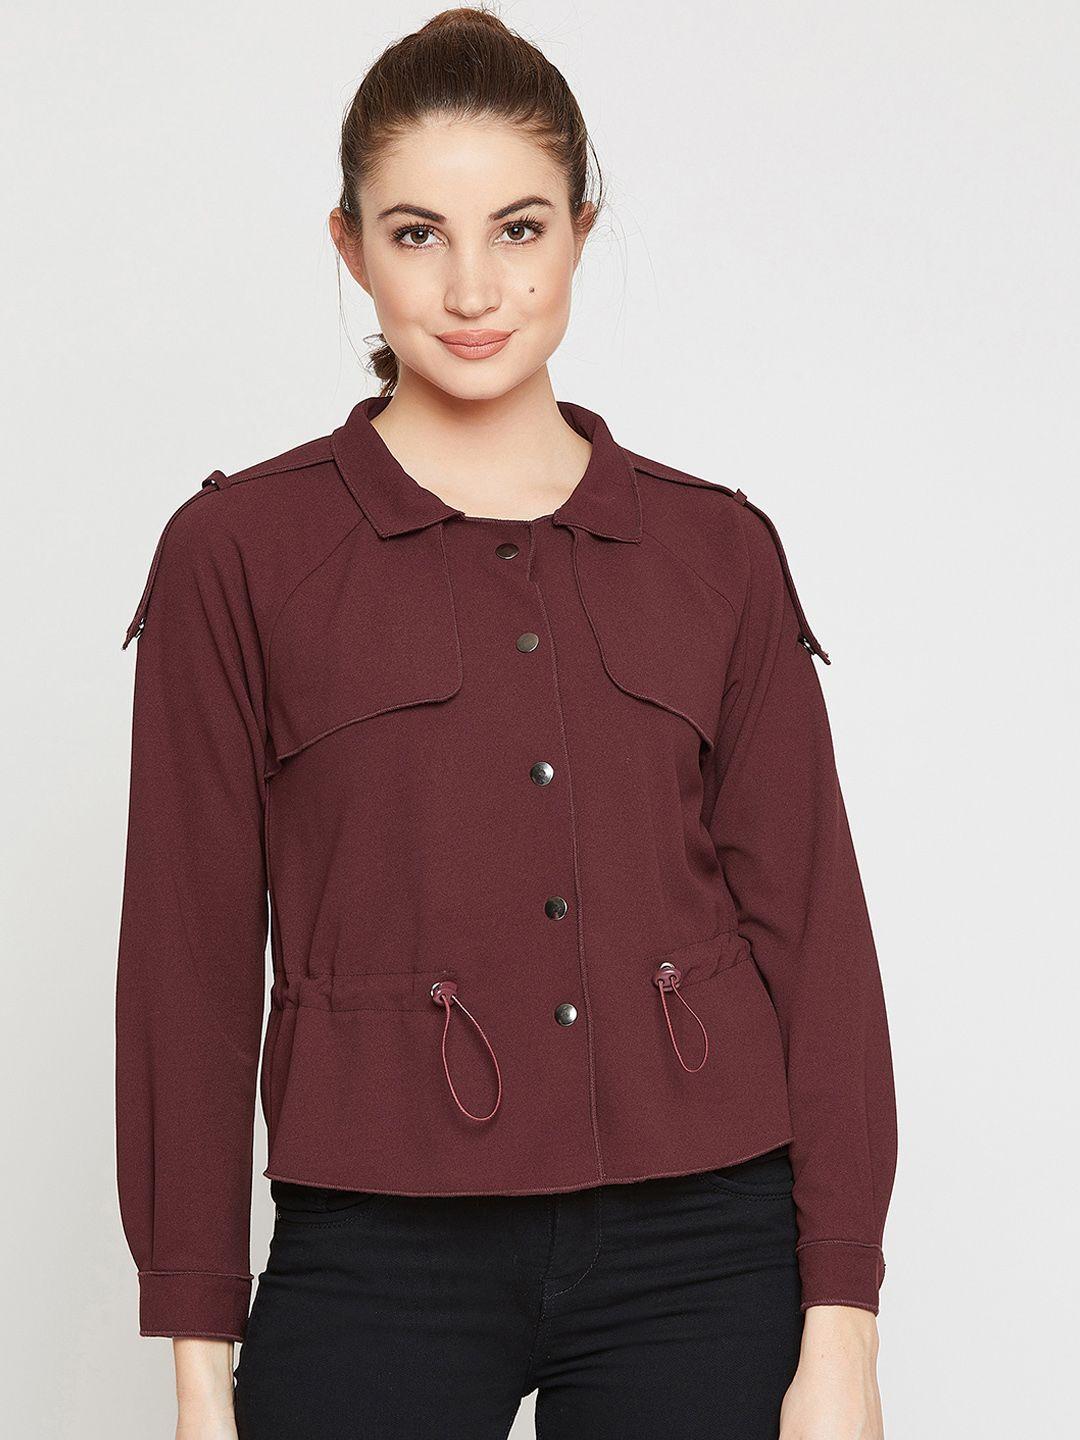 marie claire women maroon solid tailored jacket